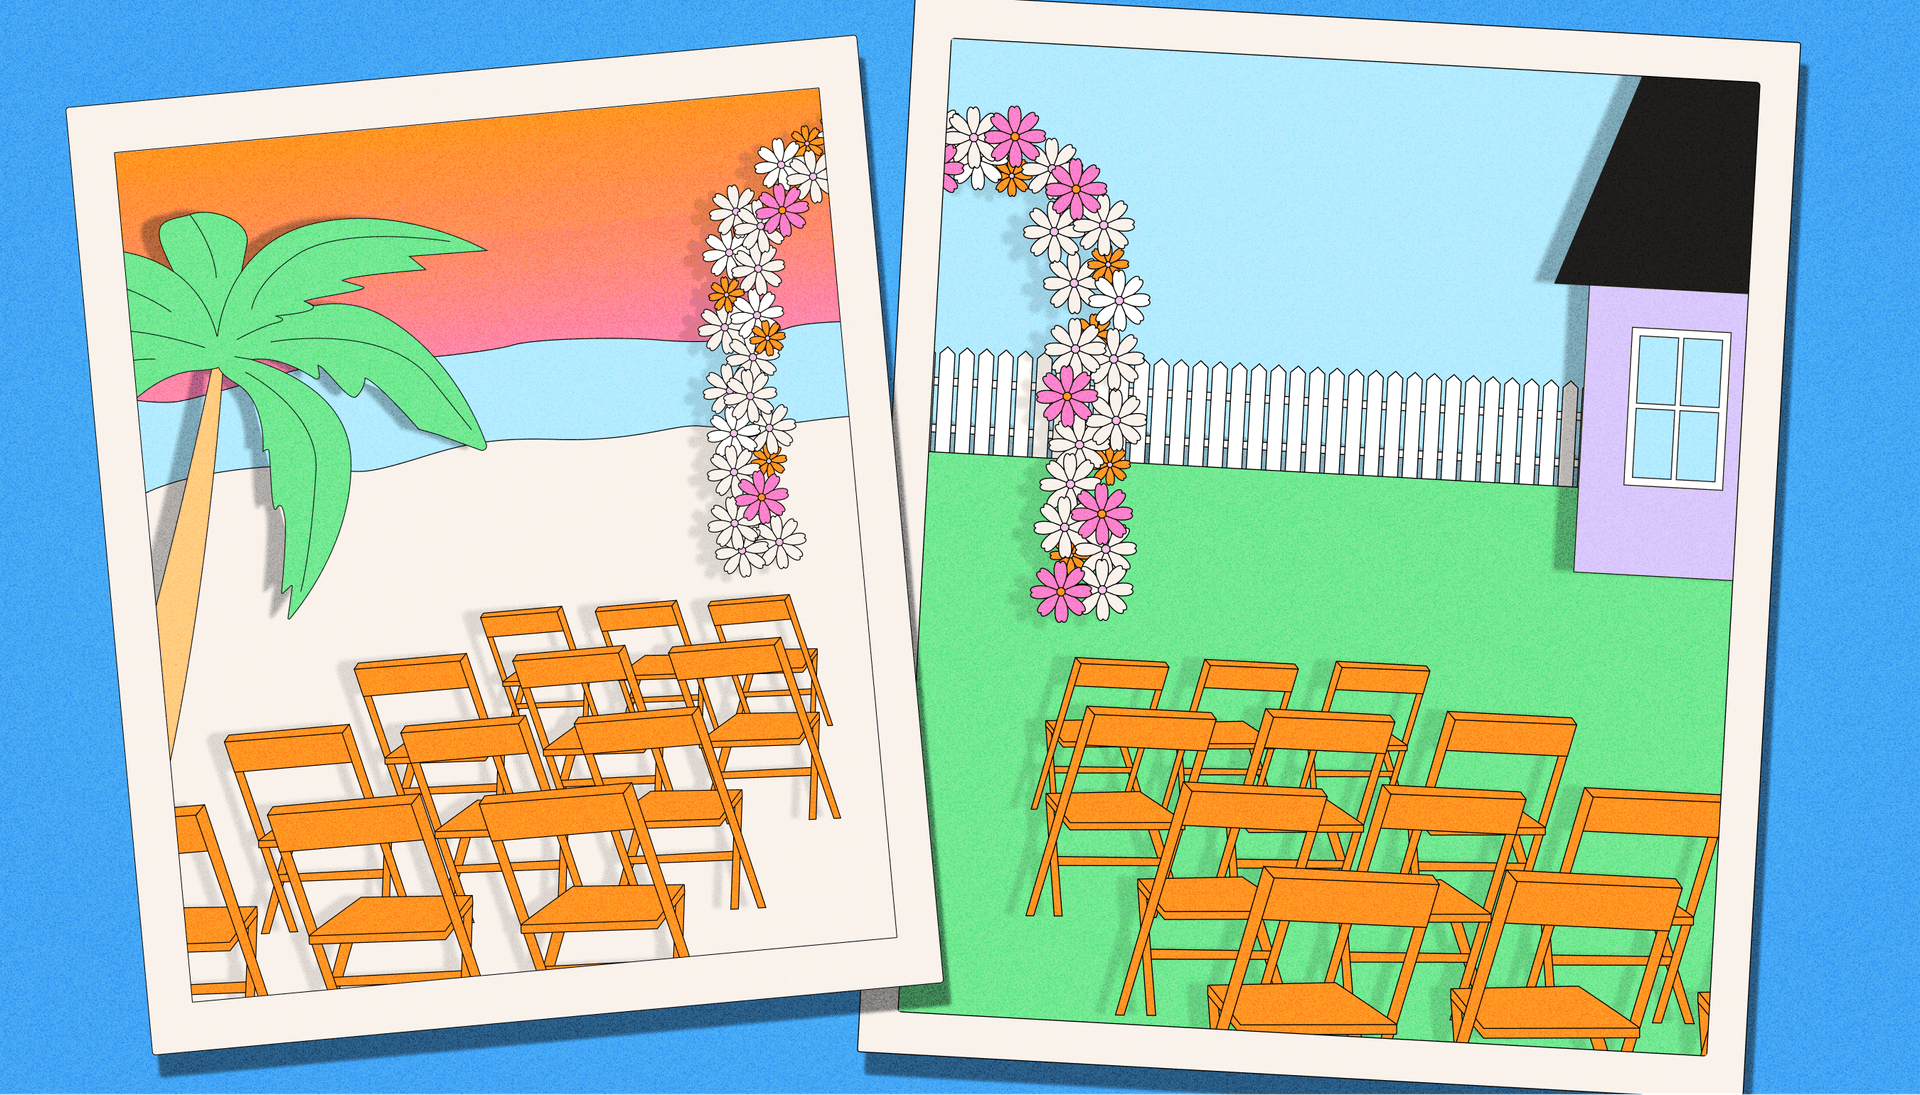 Illustration of wedding ceremonies on a beach and in a backyard